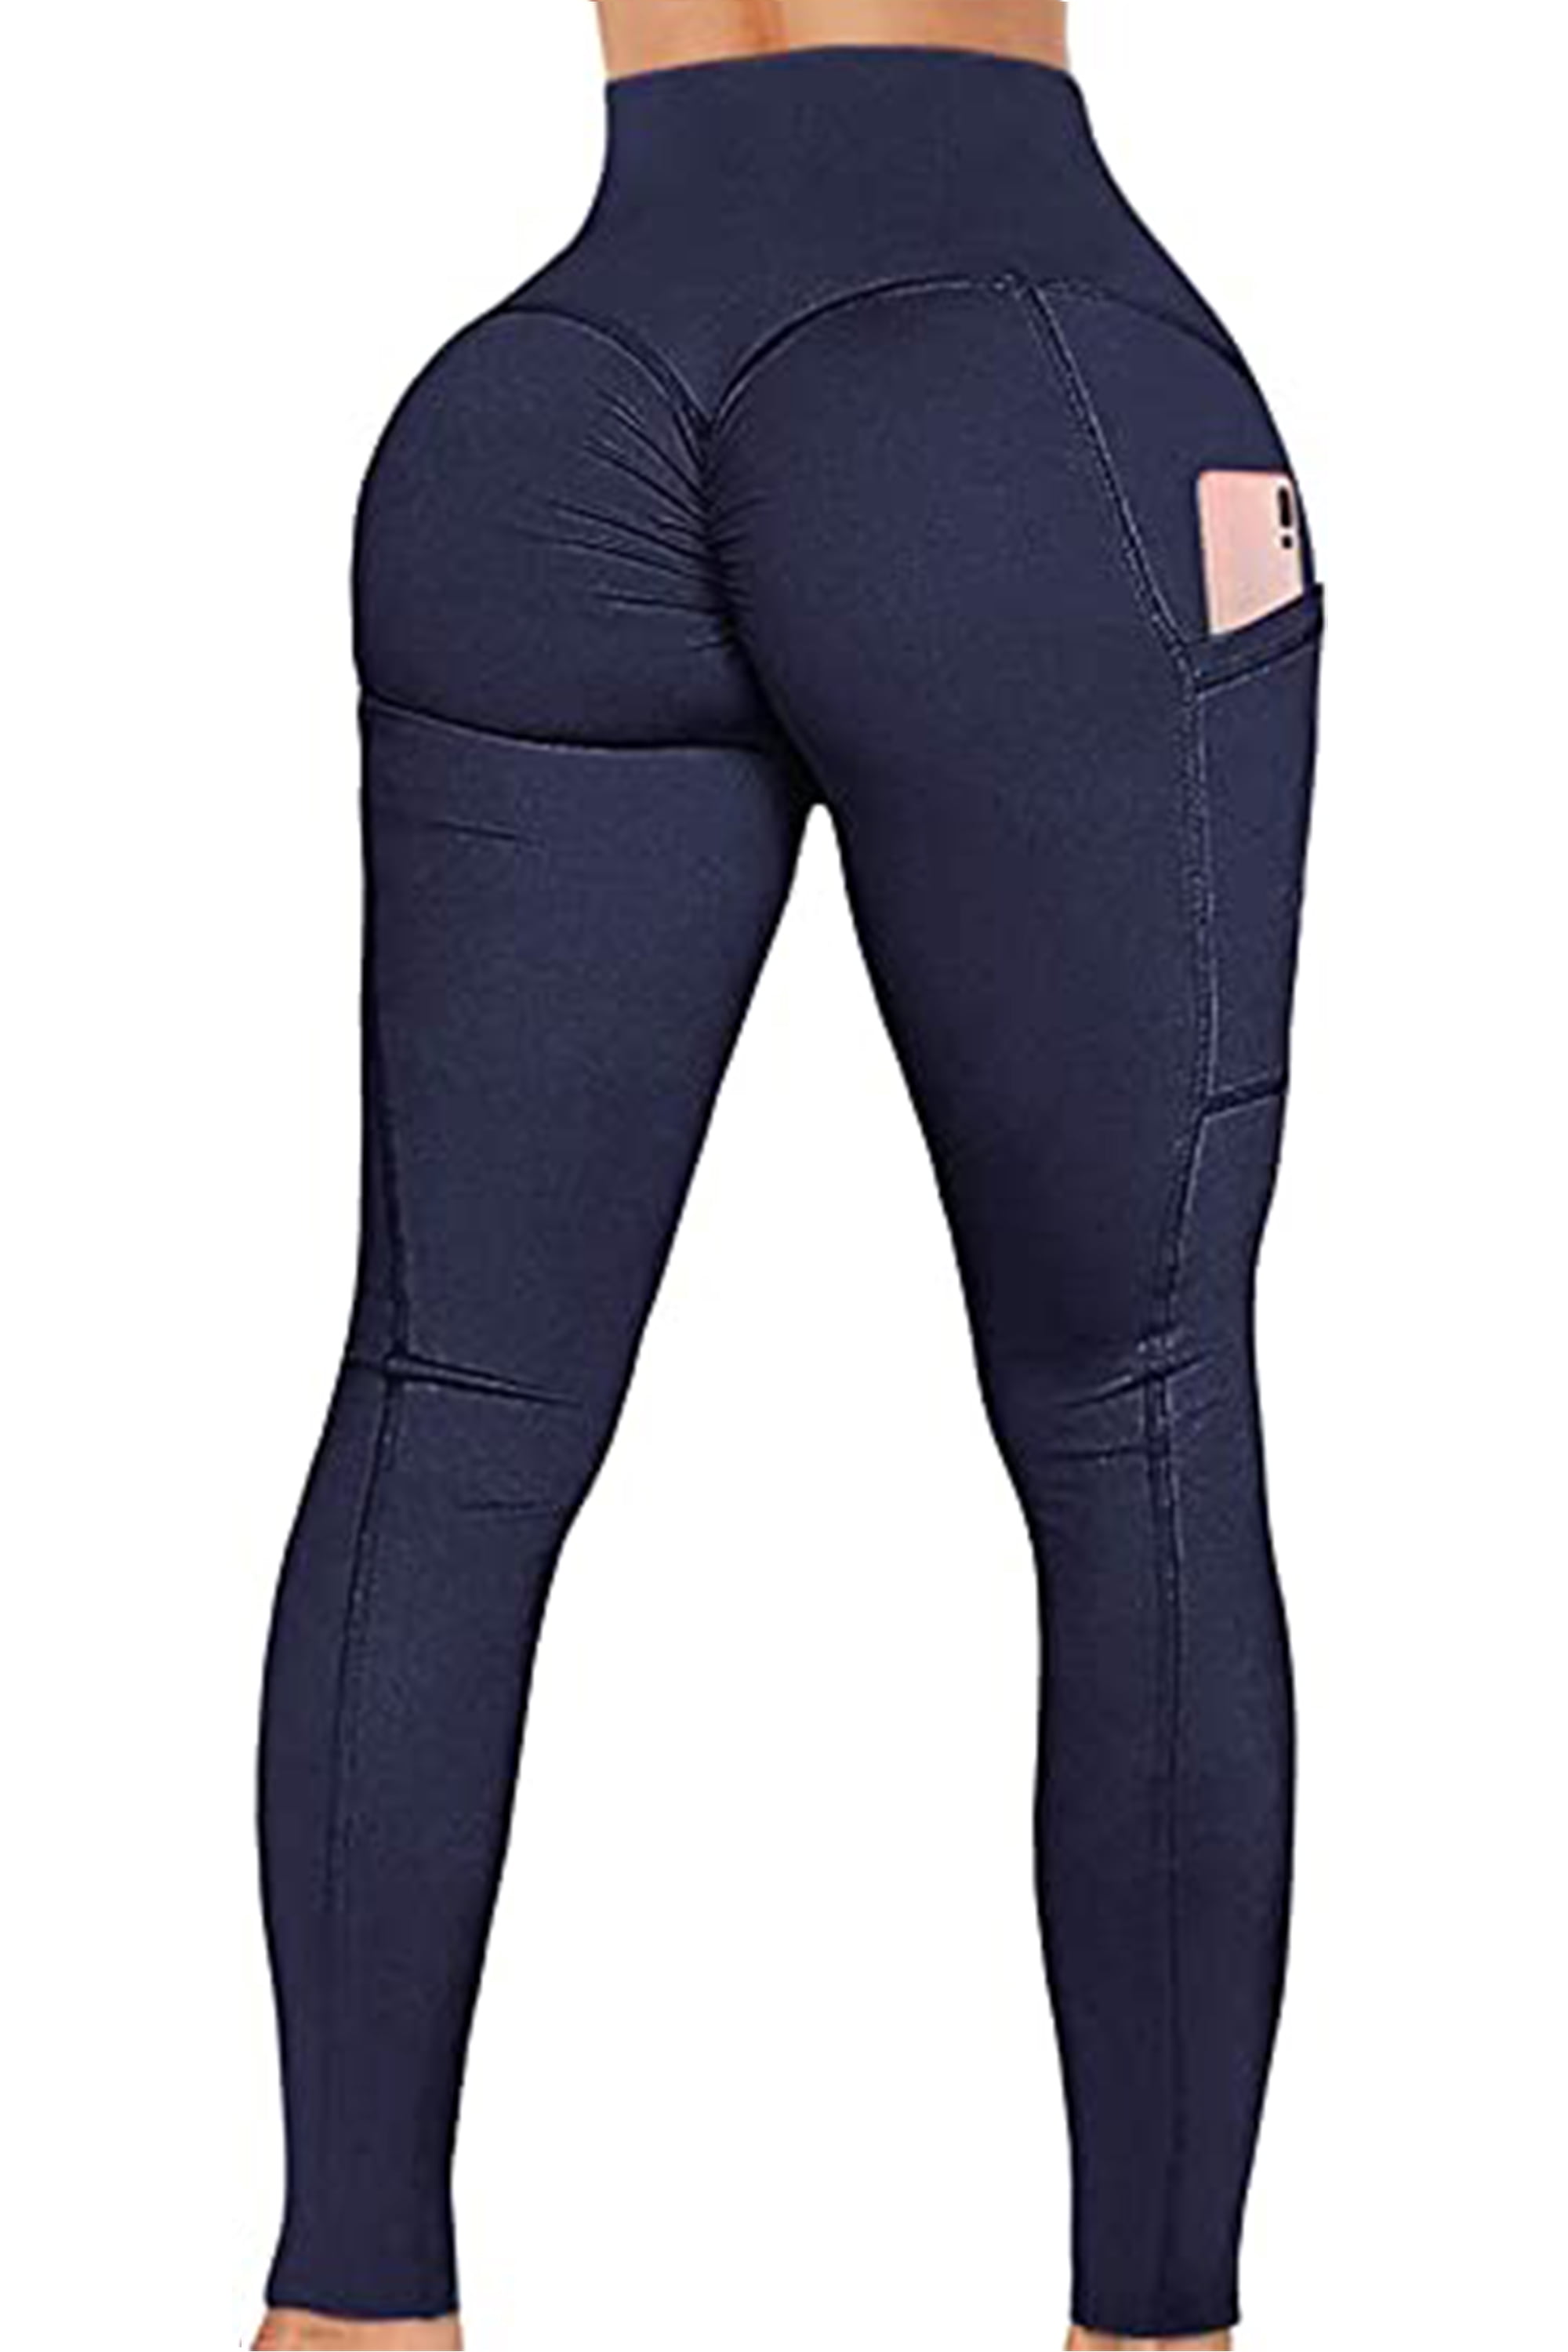 Fittoo - FITTOO Scrunch Butt Leggings Side Pockets Yoga Pant Booty ...